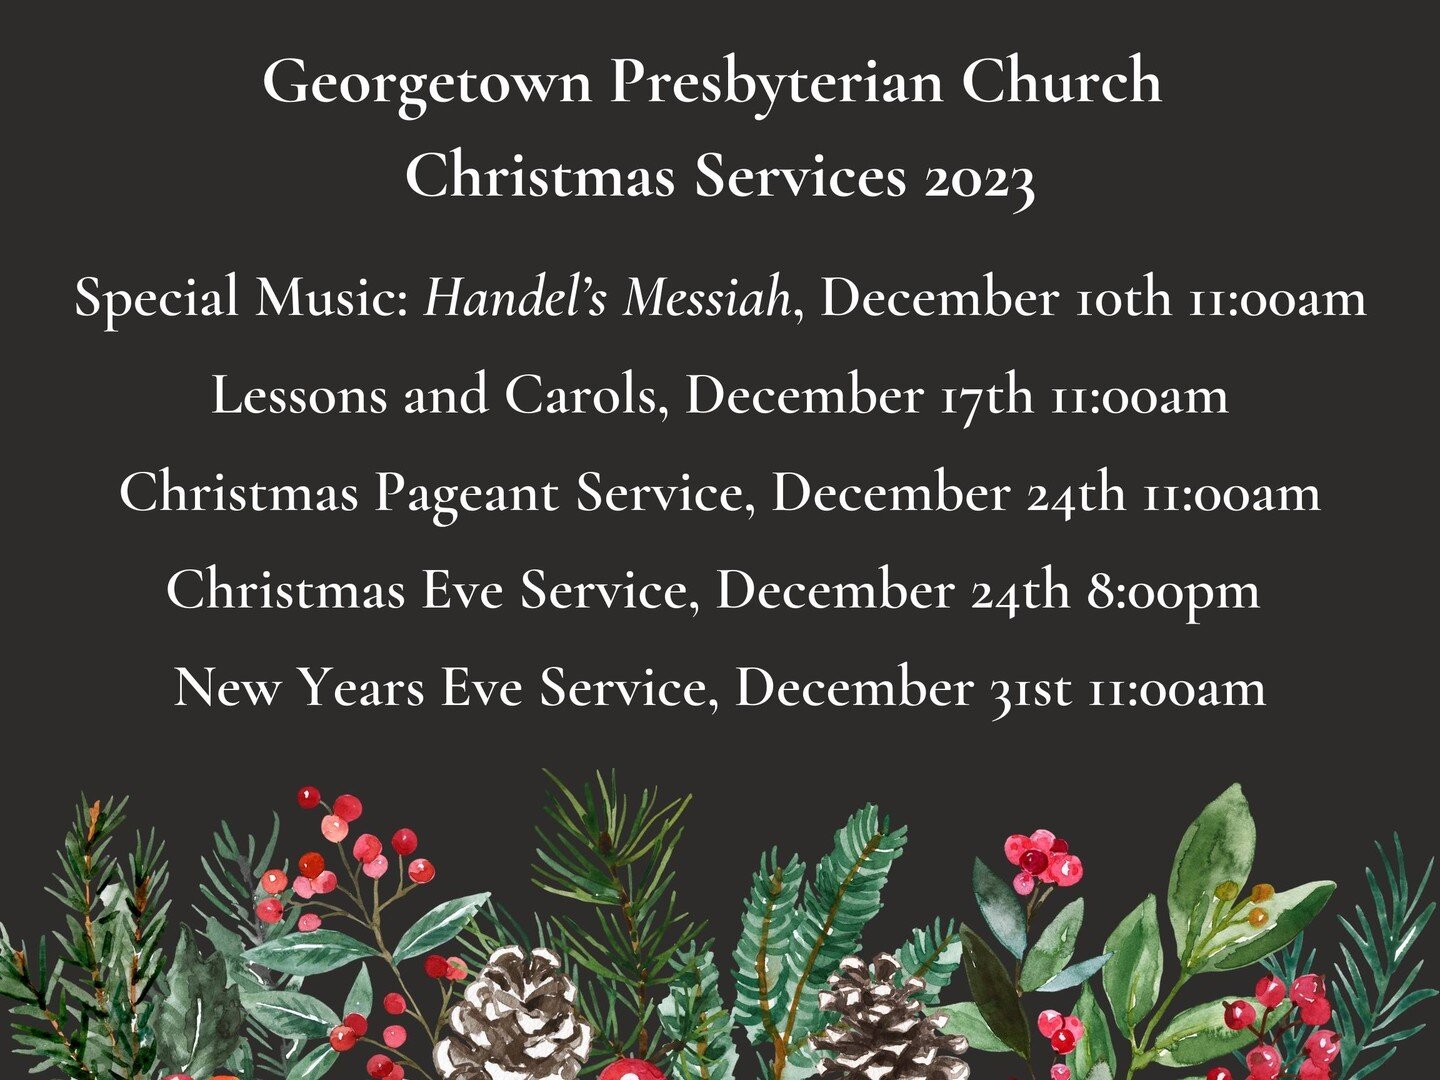 Join us this Advent Season at GPC!